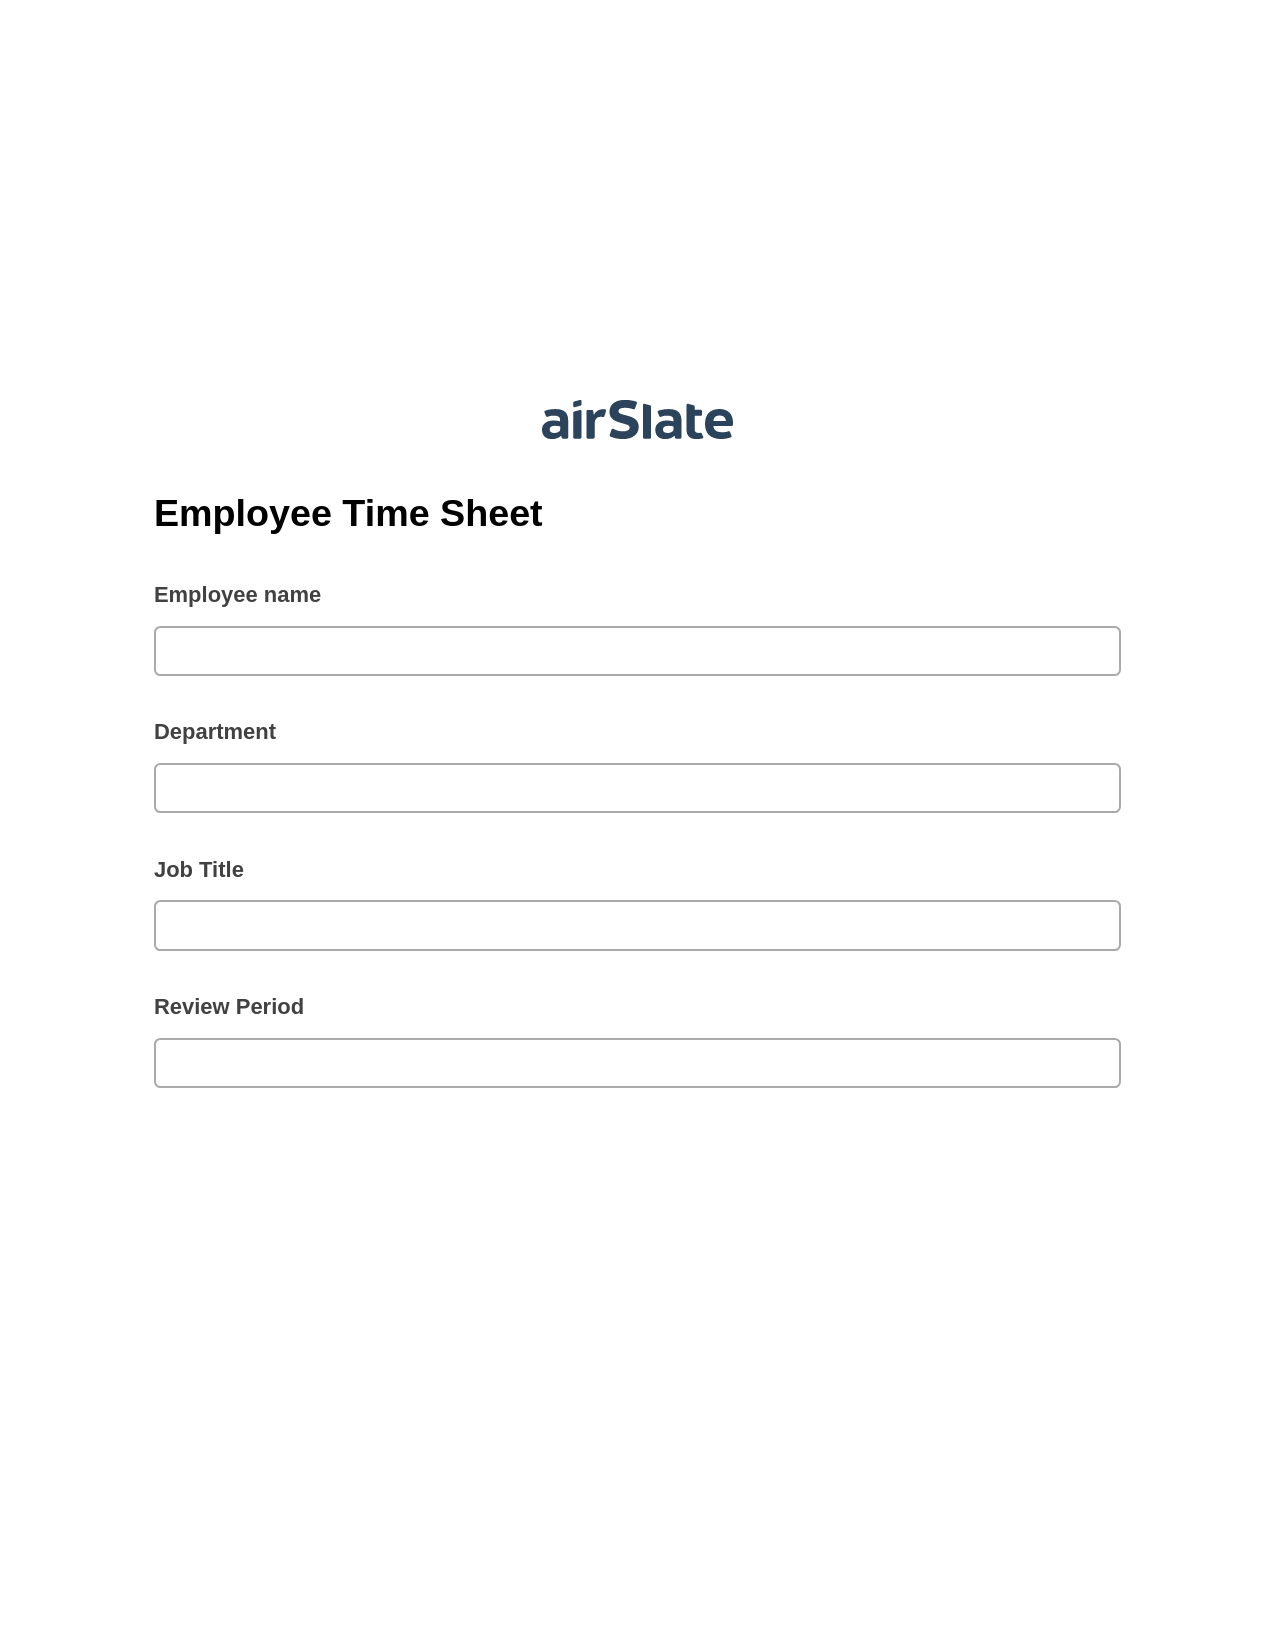 Multirole Employee Time Sheet Pre-fill from MS Dynamics 365 Records, Create slate addon, Export to NetSuite Bot